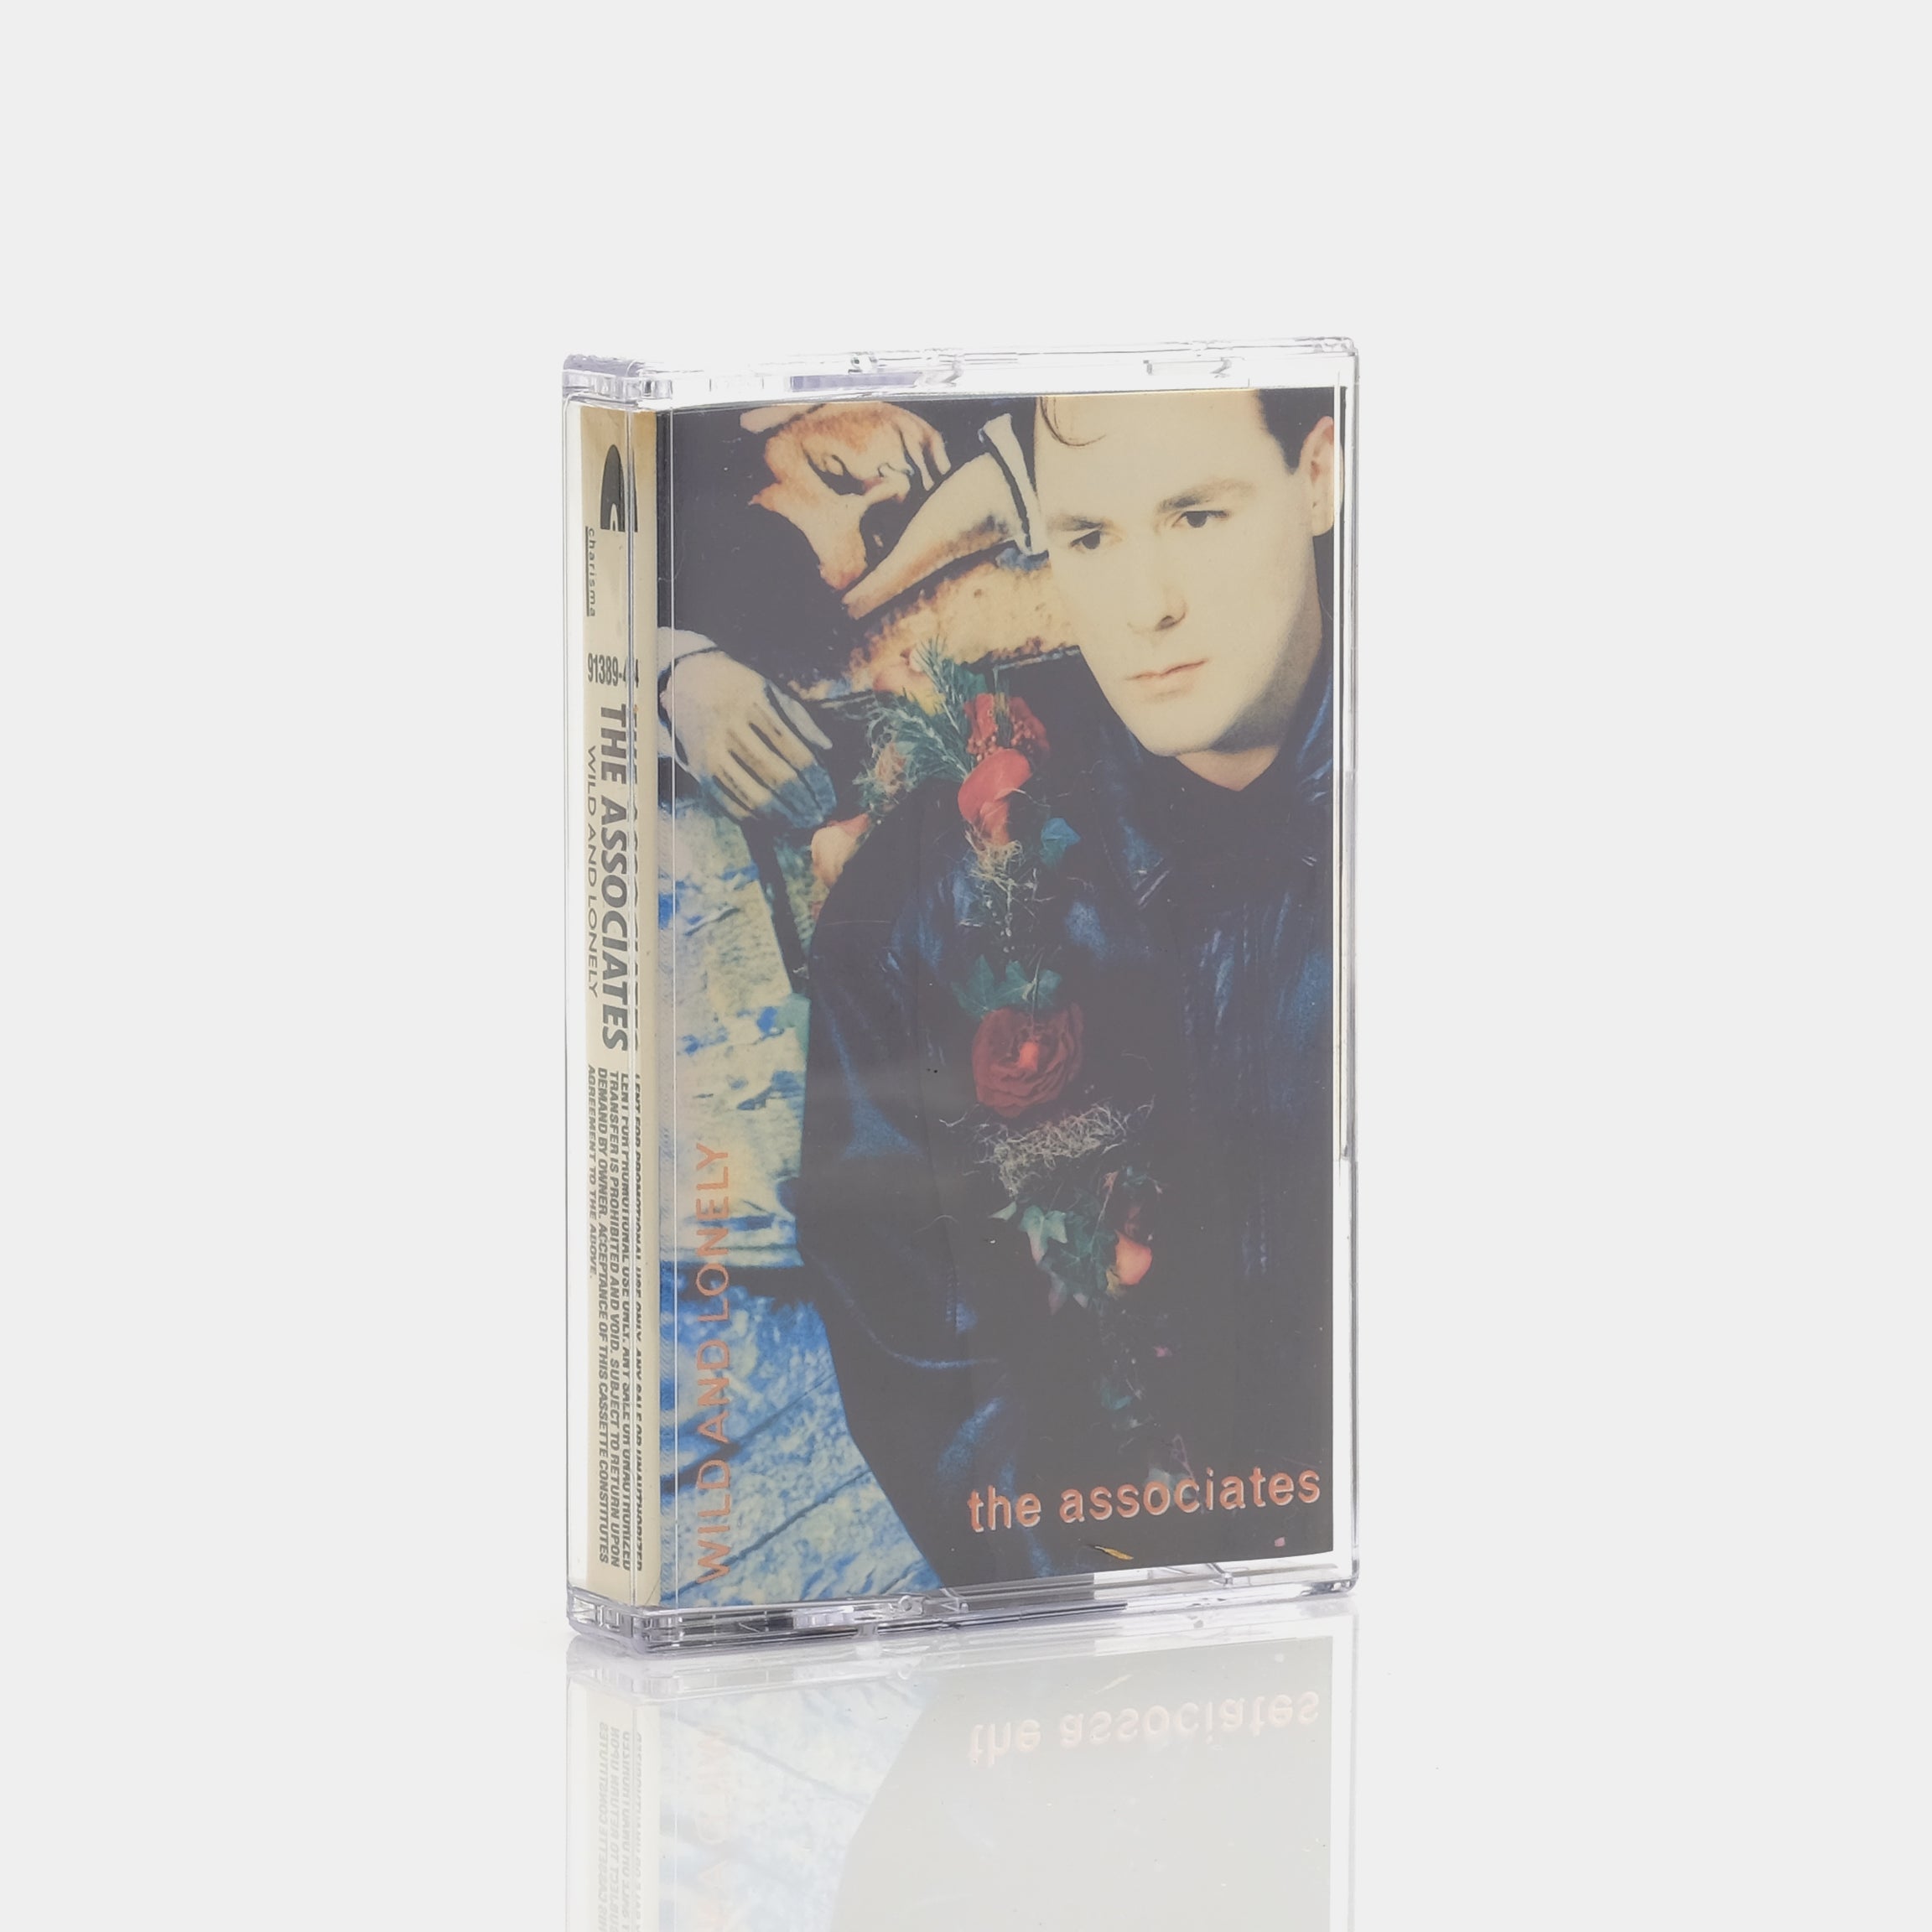 The Associates - Wild And Lonely Cassette Tape